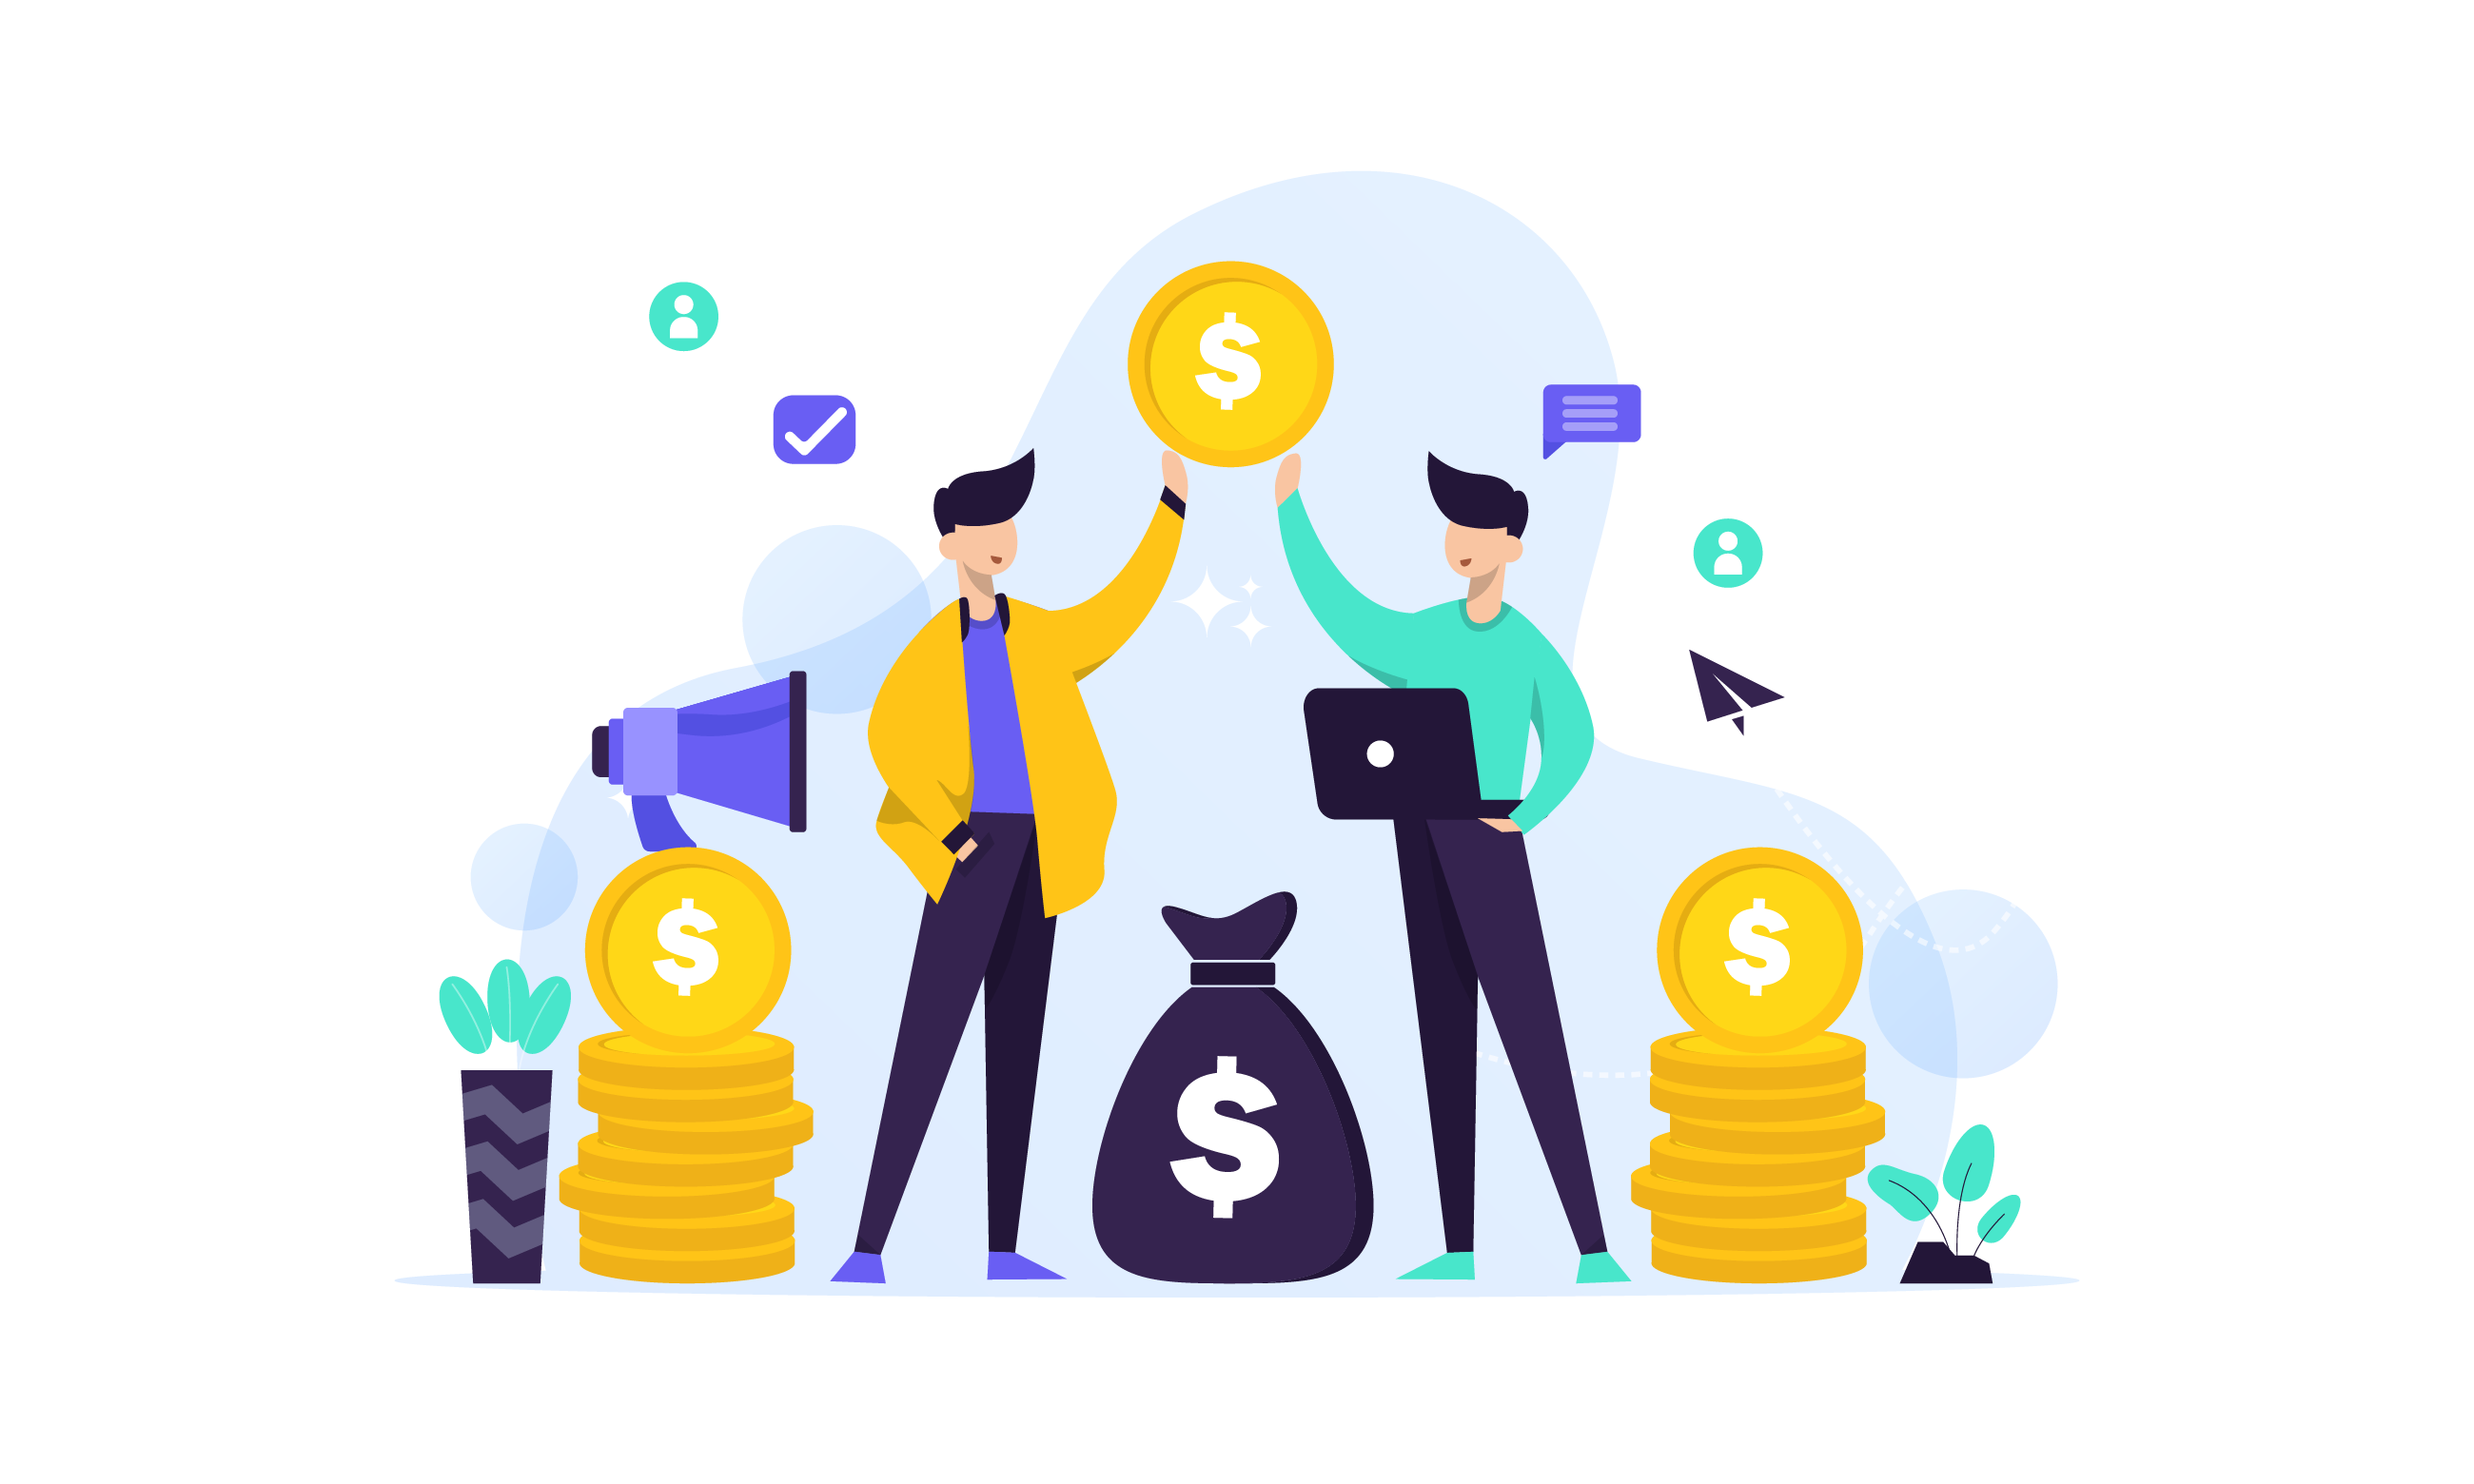 Heard of inAffiliate?  inAffiliate is a cloud based SaaS video collaboration affiliate platform, get paid for anticipating your audience’s needs and recommending vertical wise great video meeting solutions.